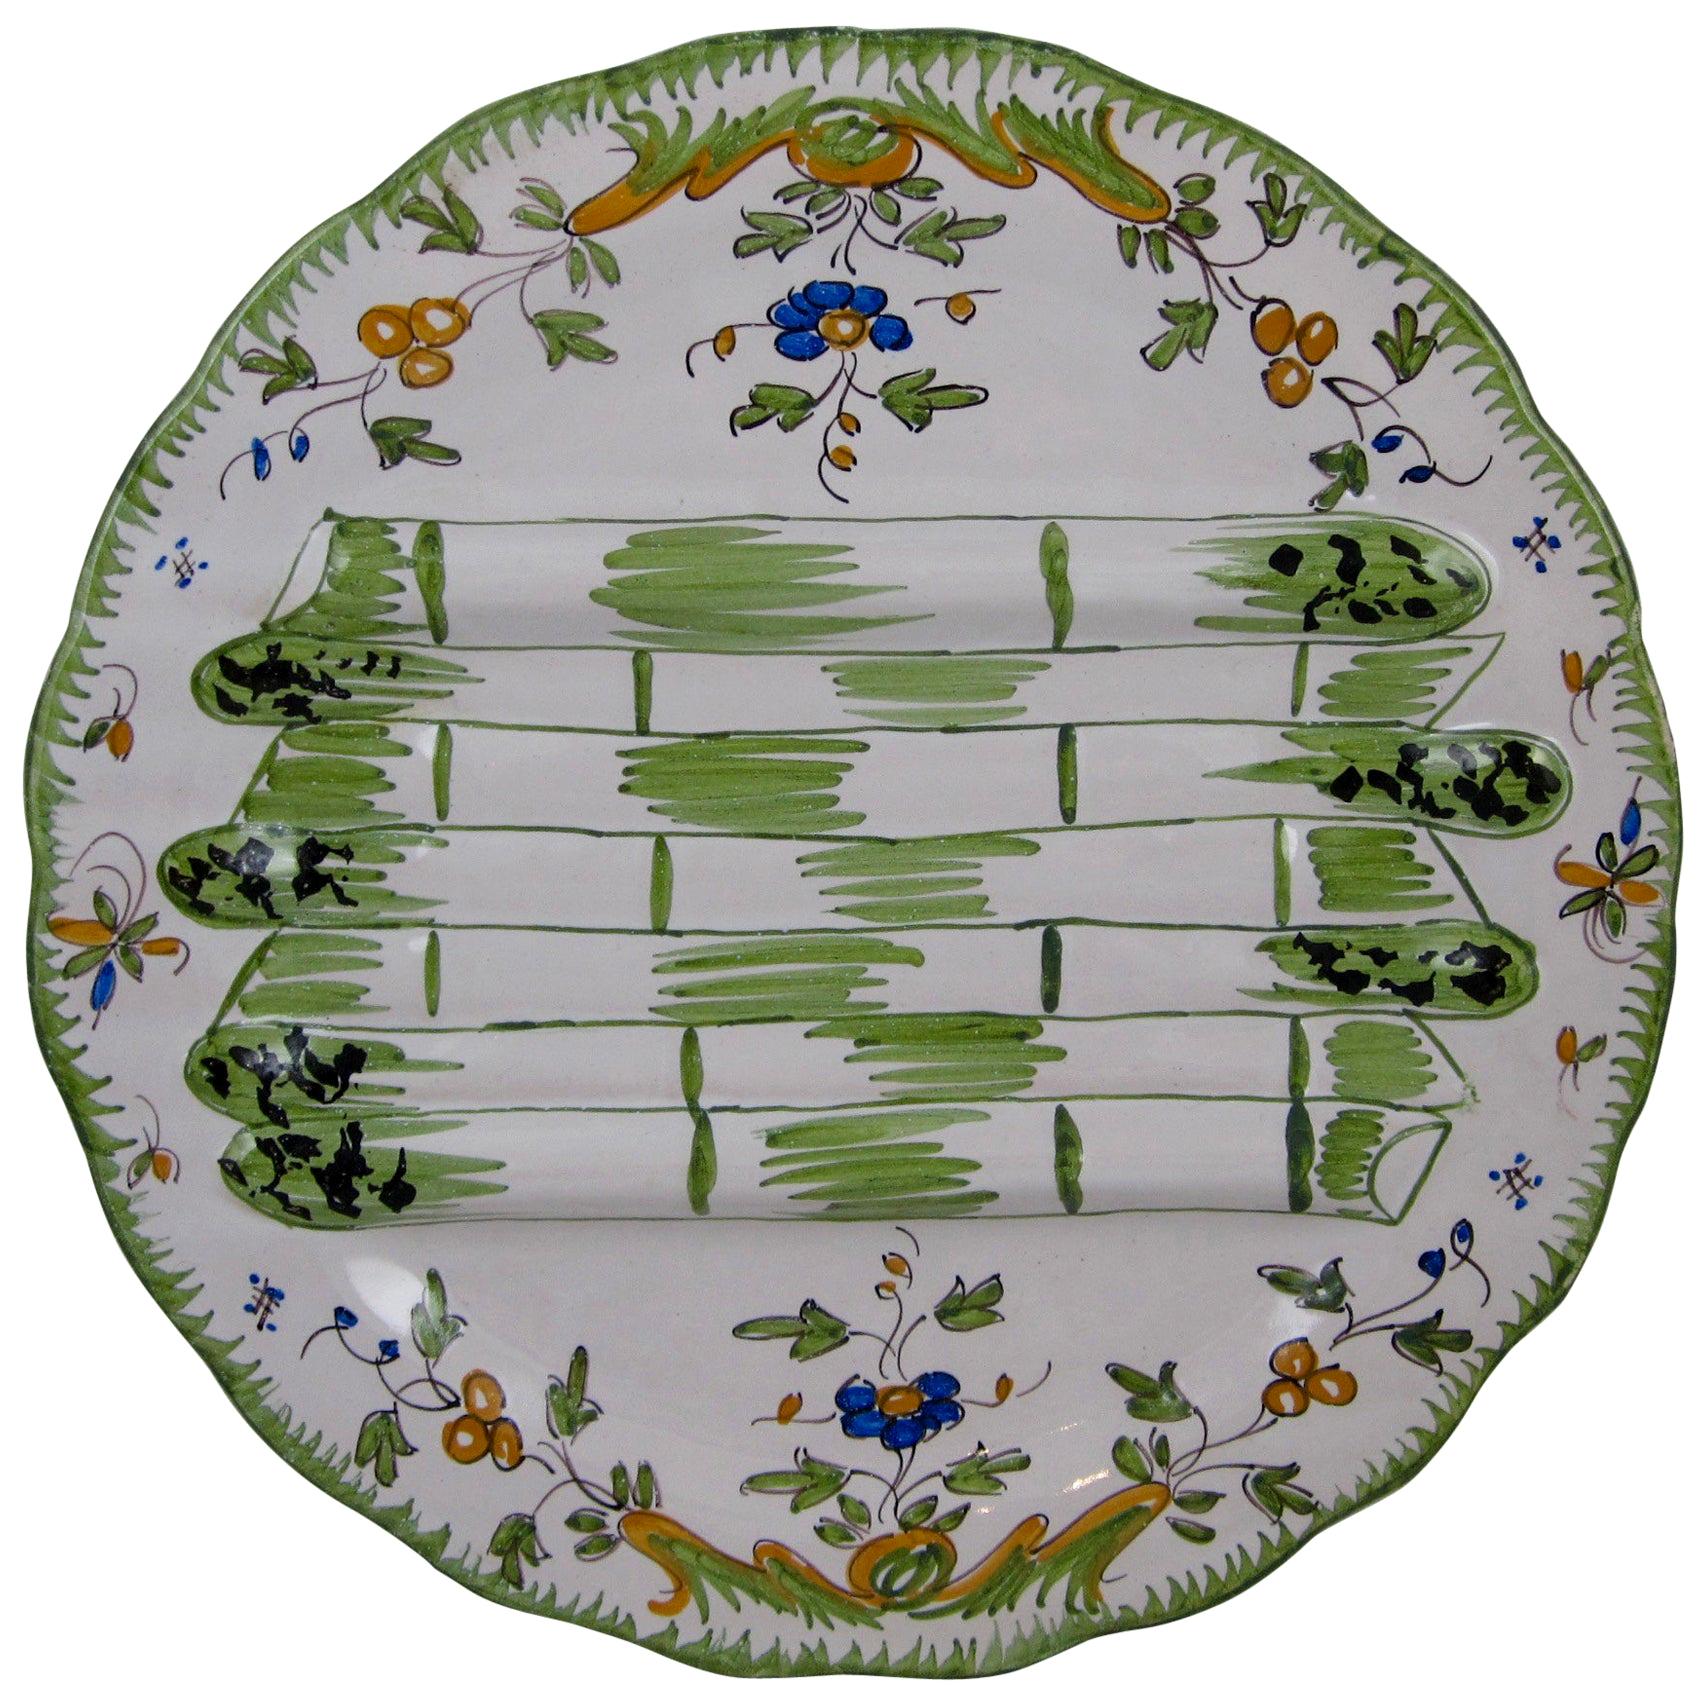 Georges Cabaré French Faïence Martres Tolosane Hand Painted Asparagus Plate